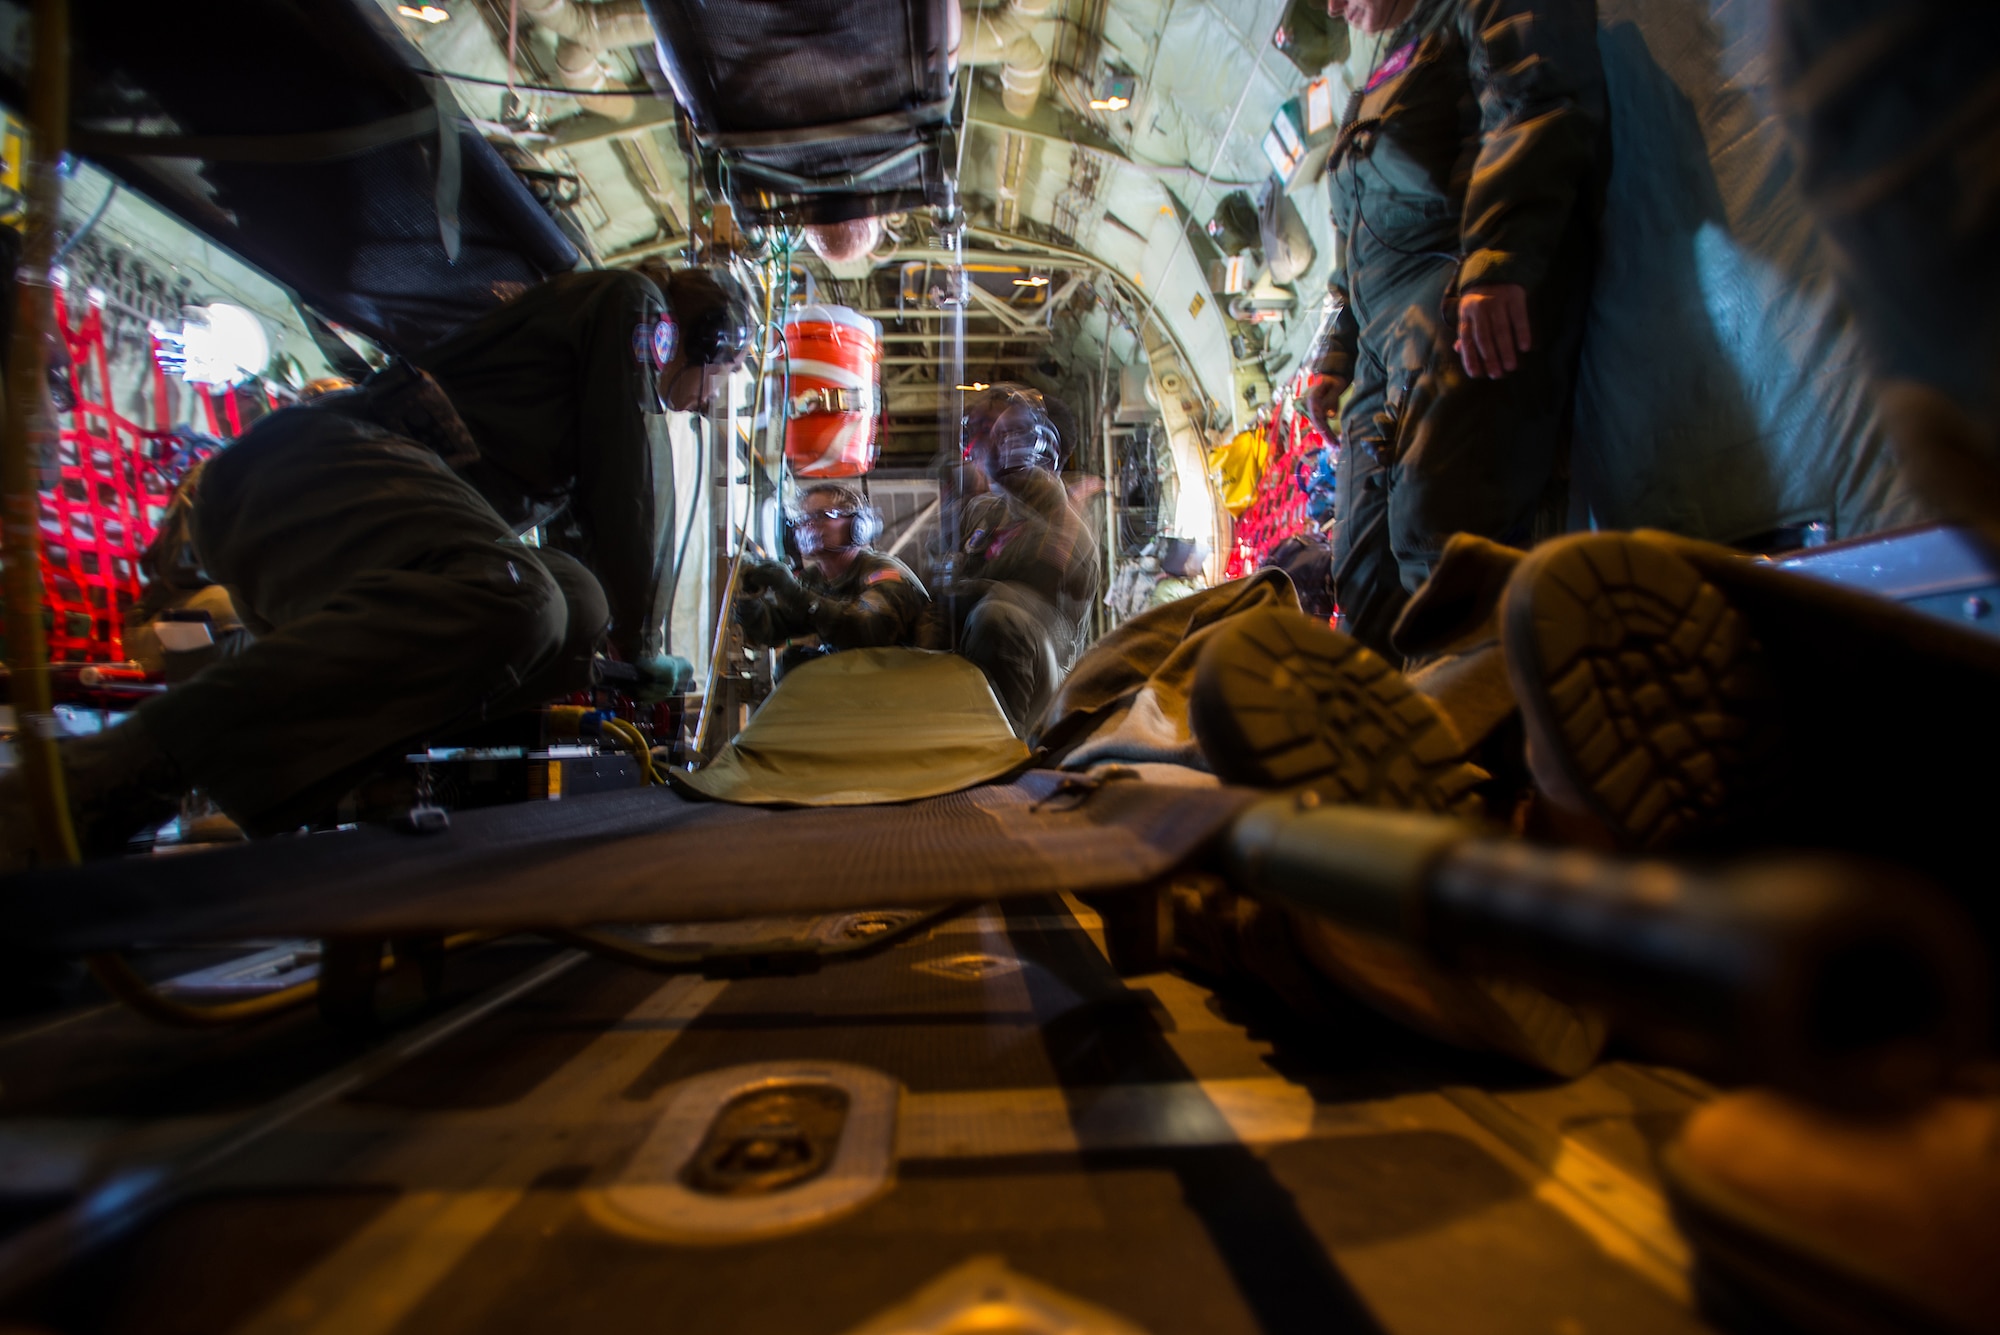 Members of the 137th Aeromedical Evacuation Squadron prepare a litter for a simulated patient during an in-flight training scenario on a C-130 Hercules flown by the 130th Airlift Wing, West Virginia ANG, as part of a joint ANG training mission, Sep. 12, 2015. The training helped 137 AES Airmen experience different airframes and new flight crews while maintaining flight readiness. (U.S. Air National Guard photo by Senior Airman Tyler Woodward/Released)